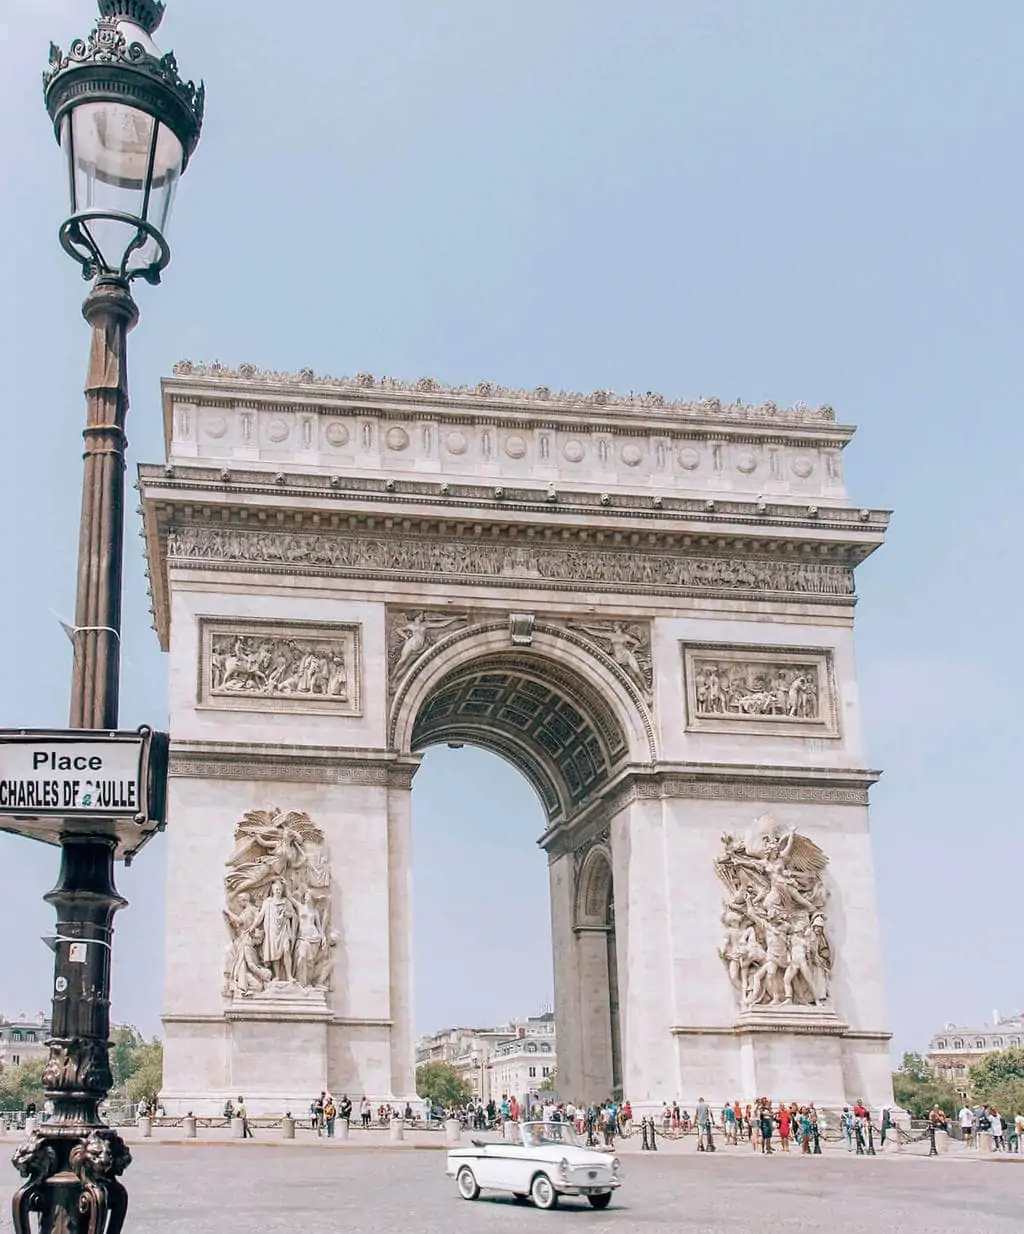 An old car drives past the Arc de Triomphe in Paris. Find lots of Paris travel tips in this guide to Paris at New Year's.